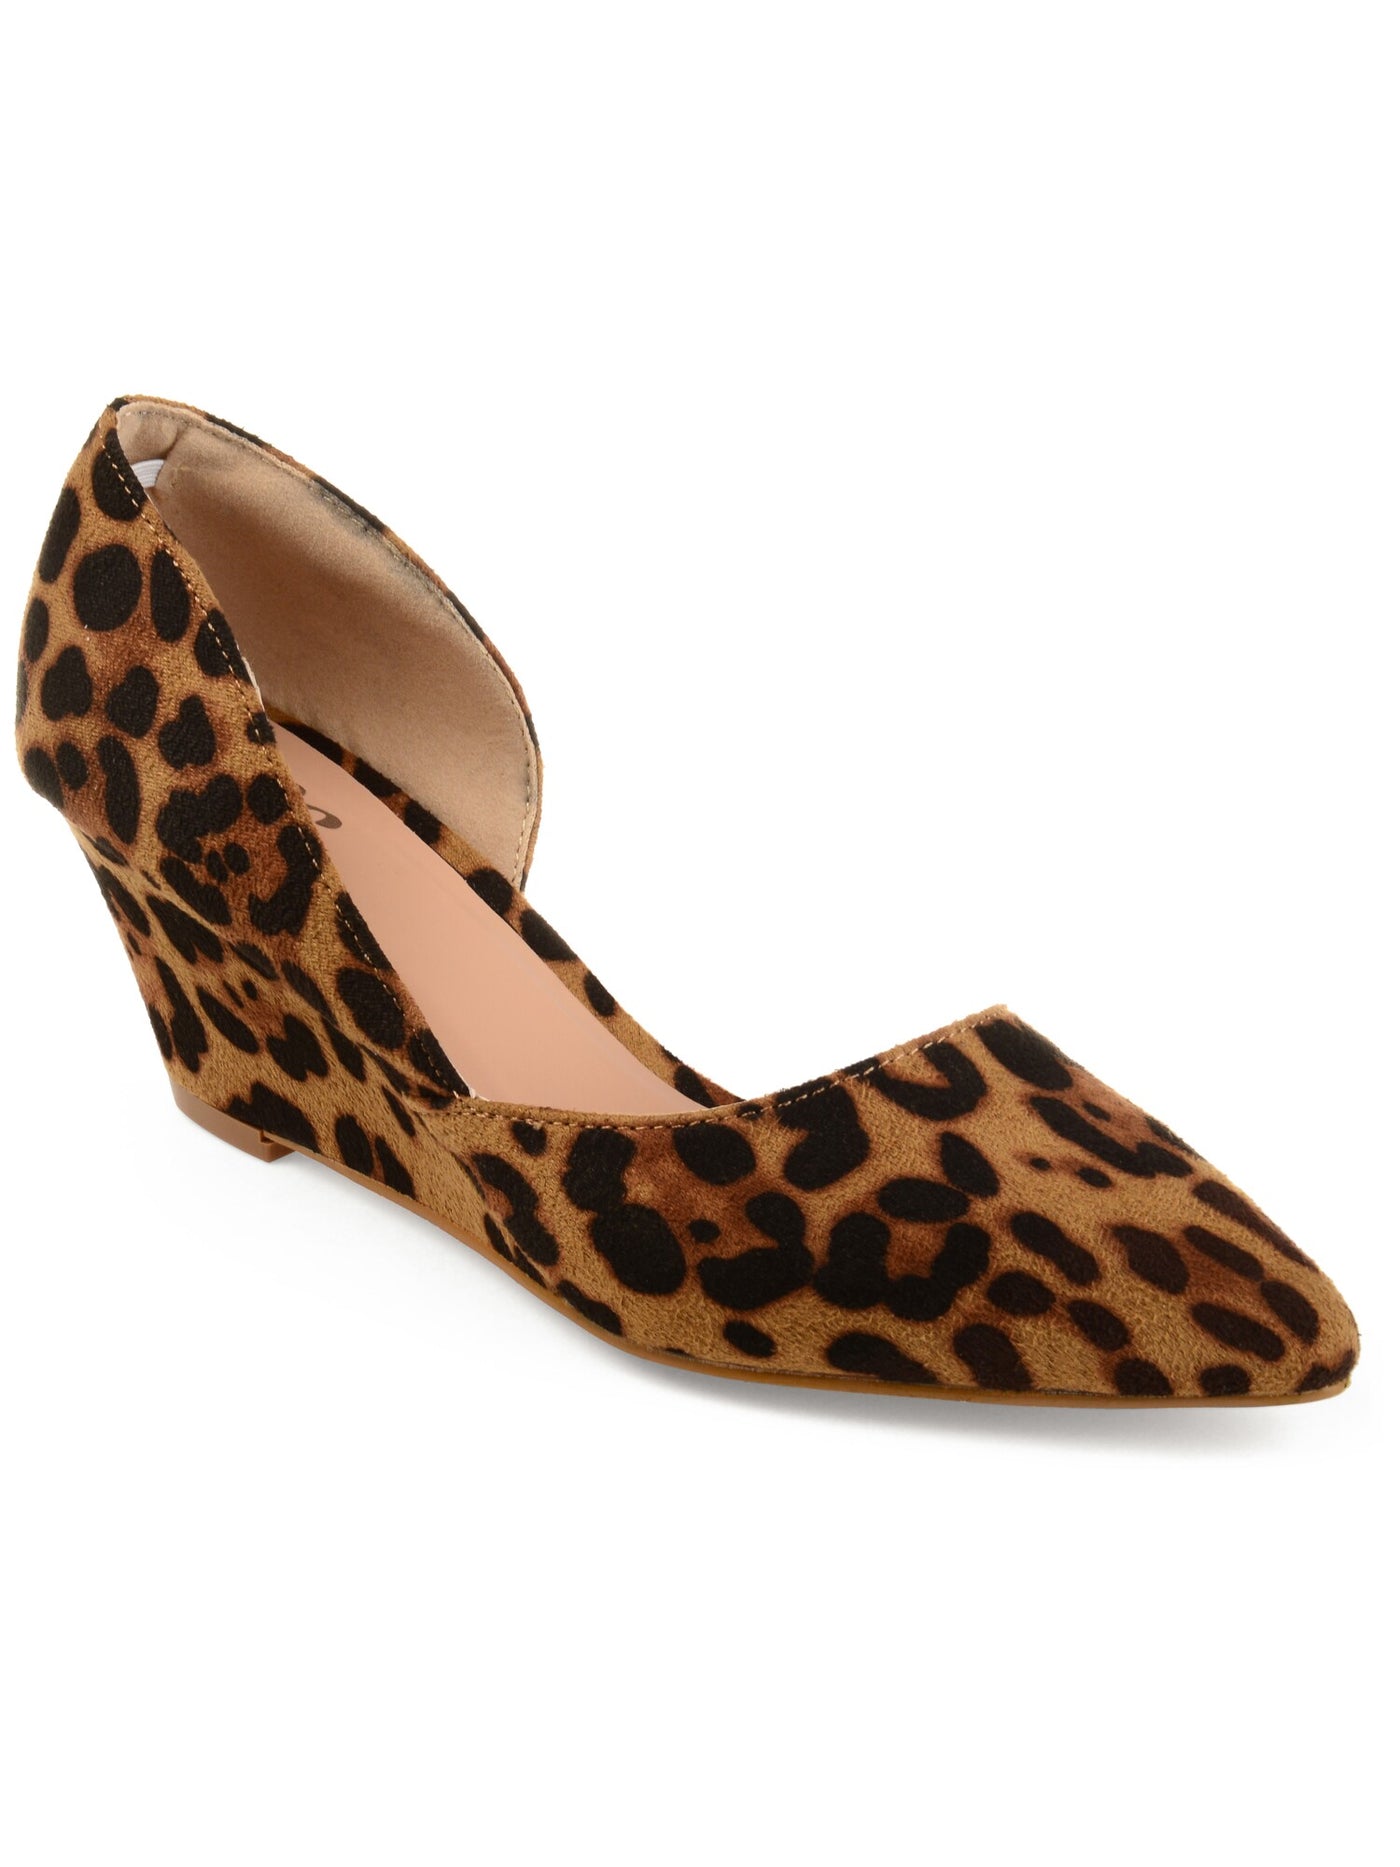 JOURNEE COLLECTION Womens Brown Leopard Print Dorsay Padded Freeform Pointed Toe Wedge Slip On Dress Pumps Shoes 6 M